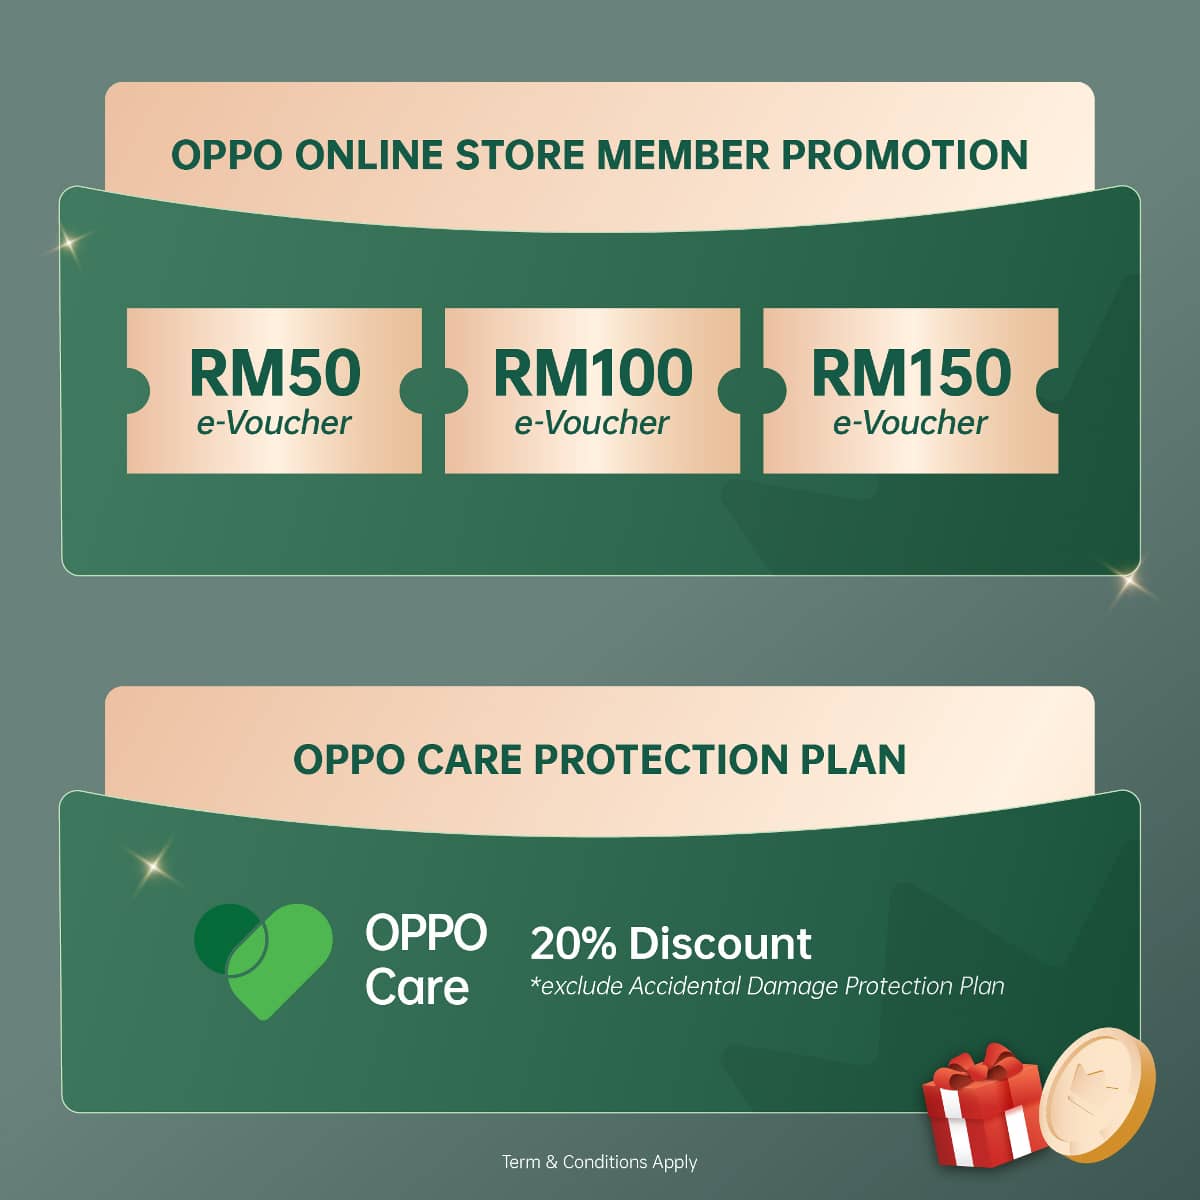 OPPO Celebrates 2 Million My OPPO Members with Giveaways Worth Up to RM150,000